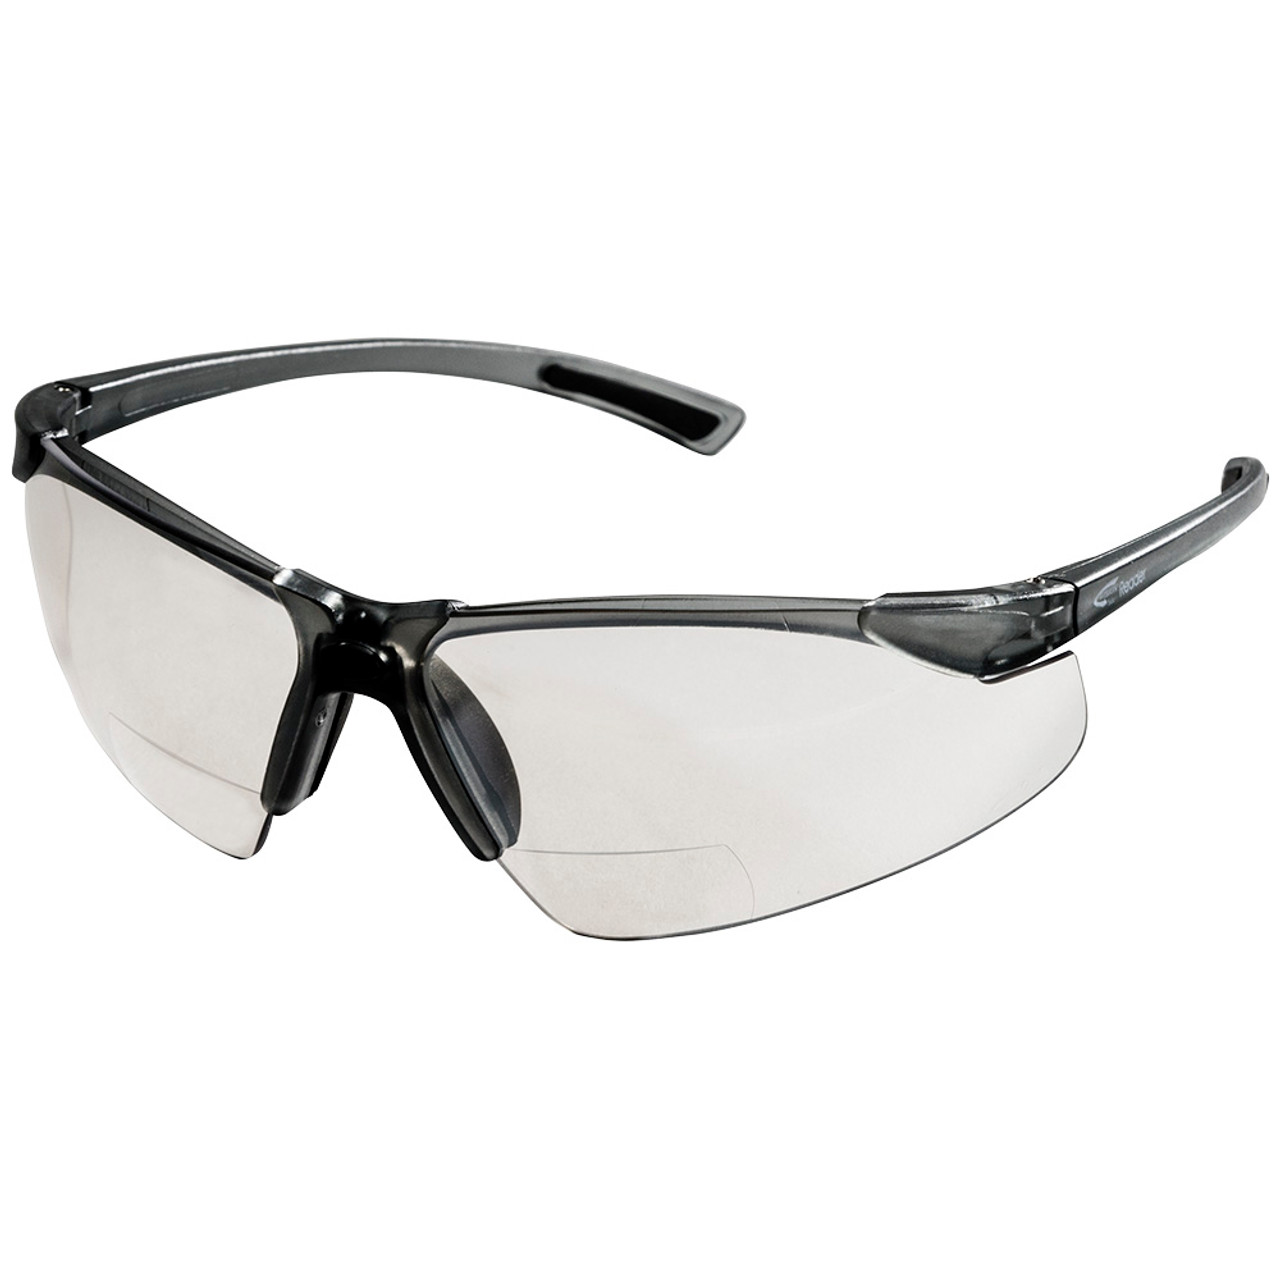 Sellstrom® XM340 Series Hard Coated Wrap Around Safety Glasses - Clear - 2.0x Magnification - Smoke Tint Frames  S74203